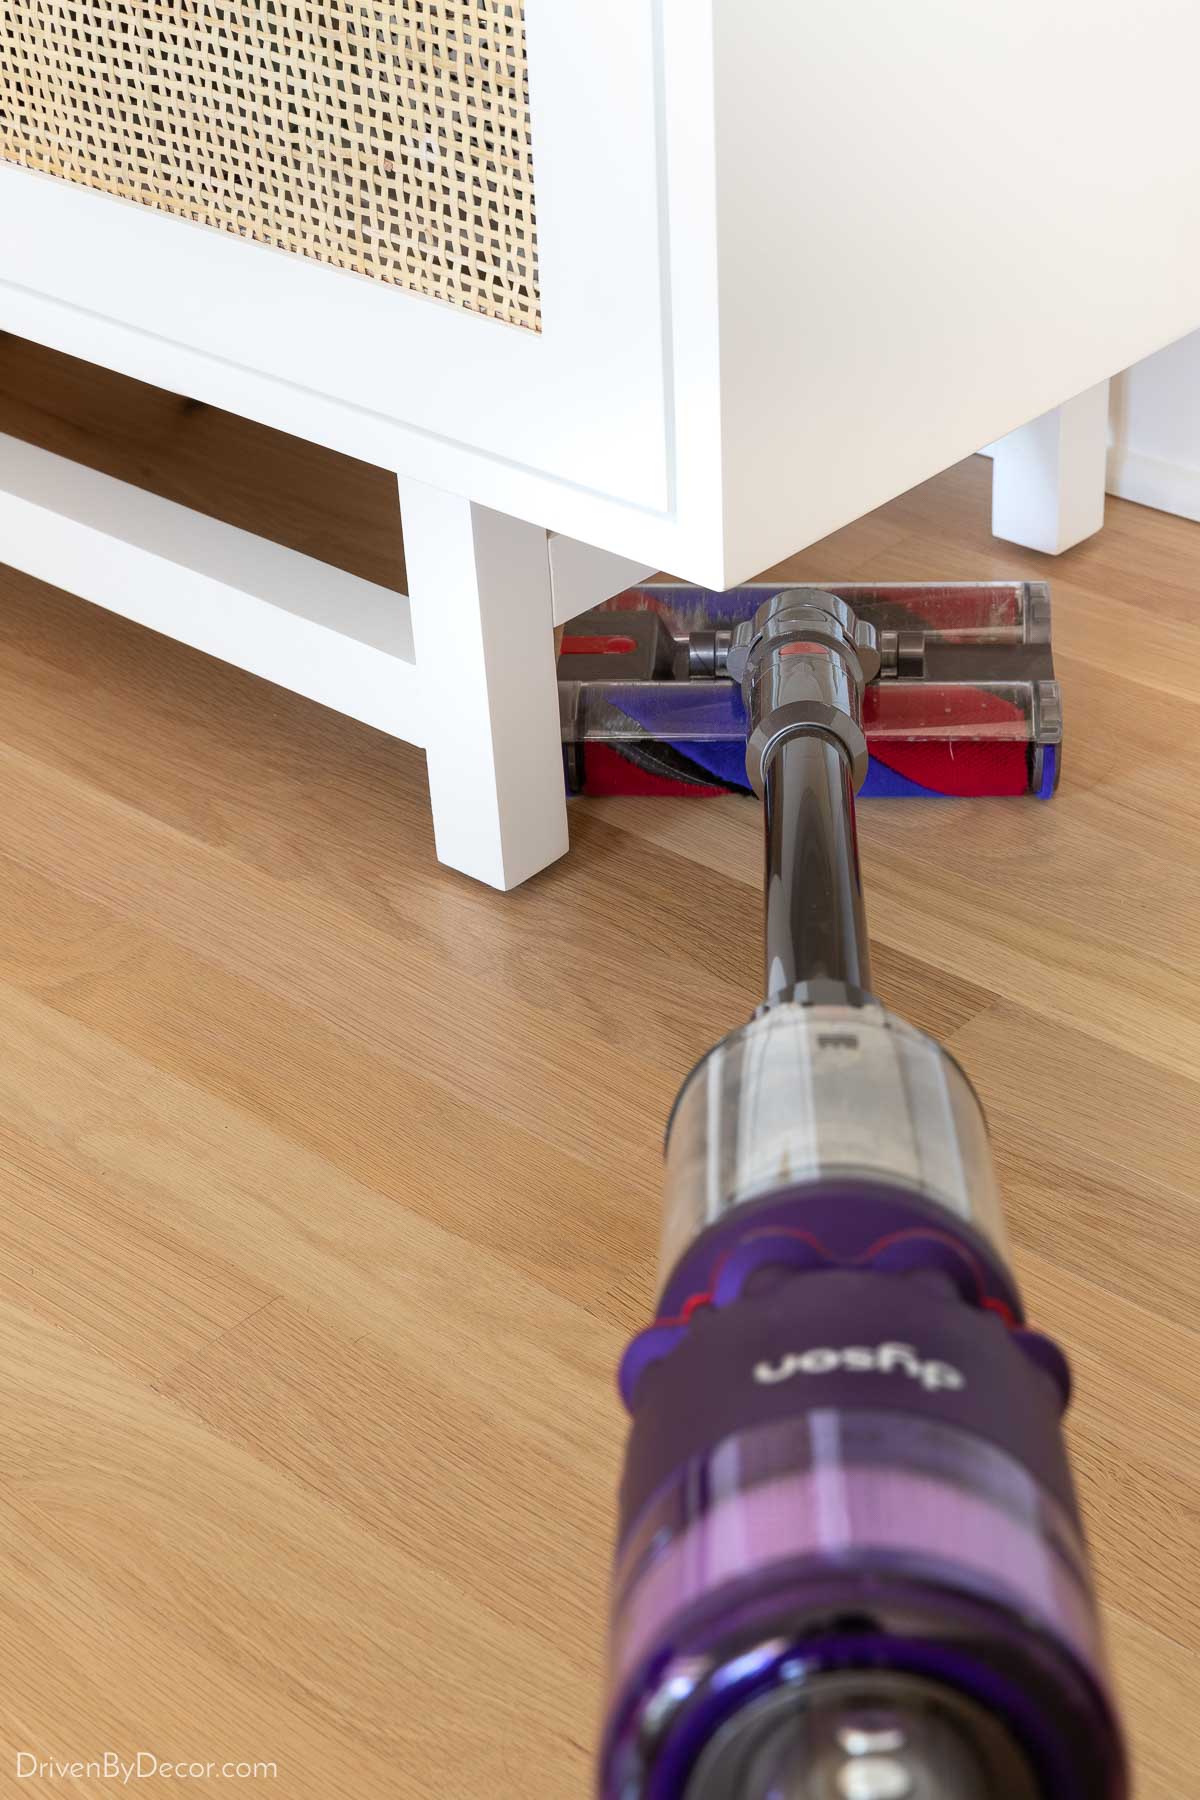 The hardwood floor friendly vacuum that I use for daily clean-ups!